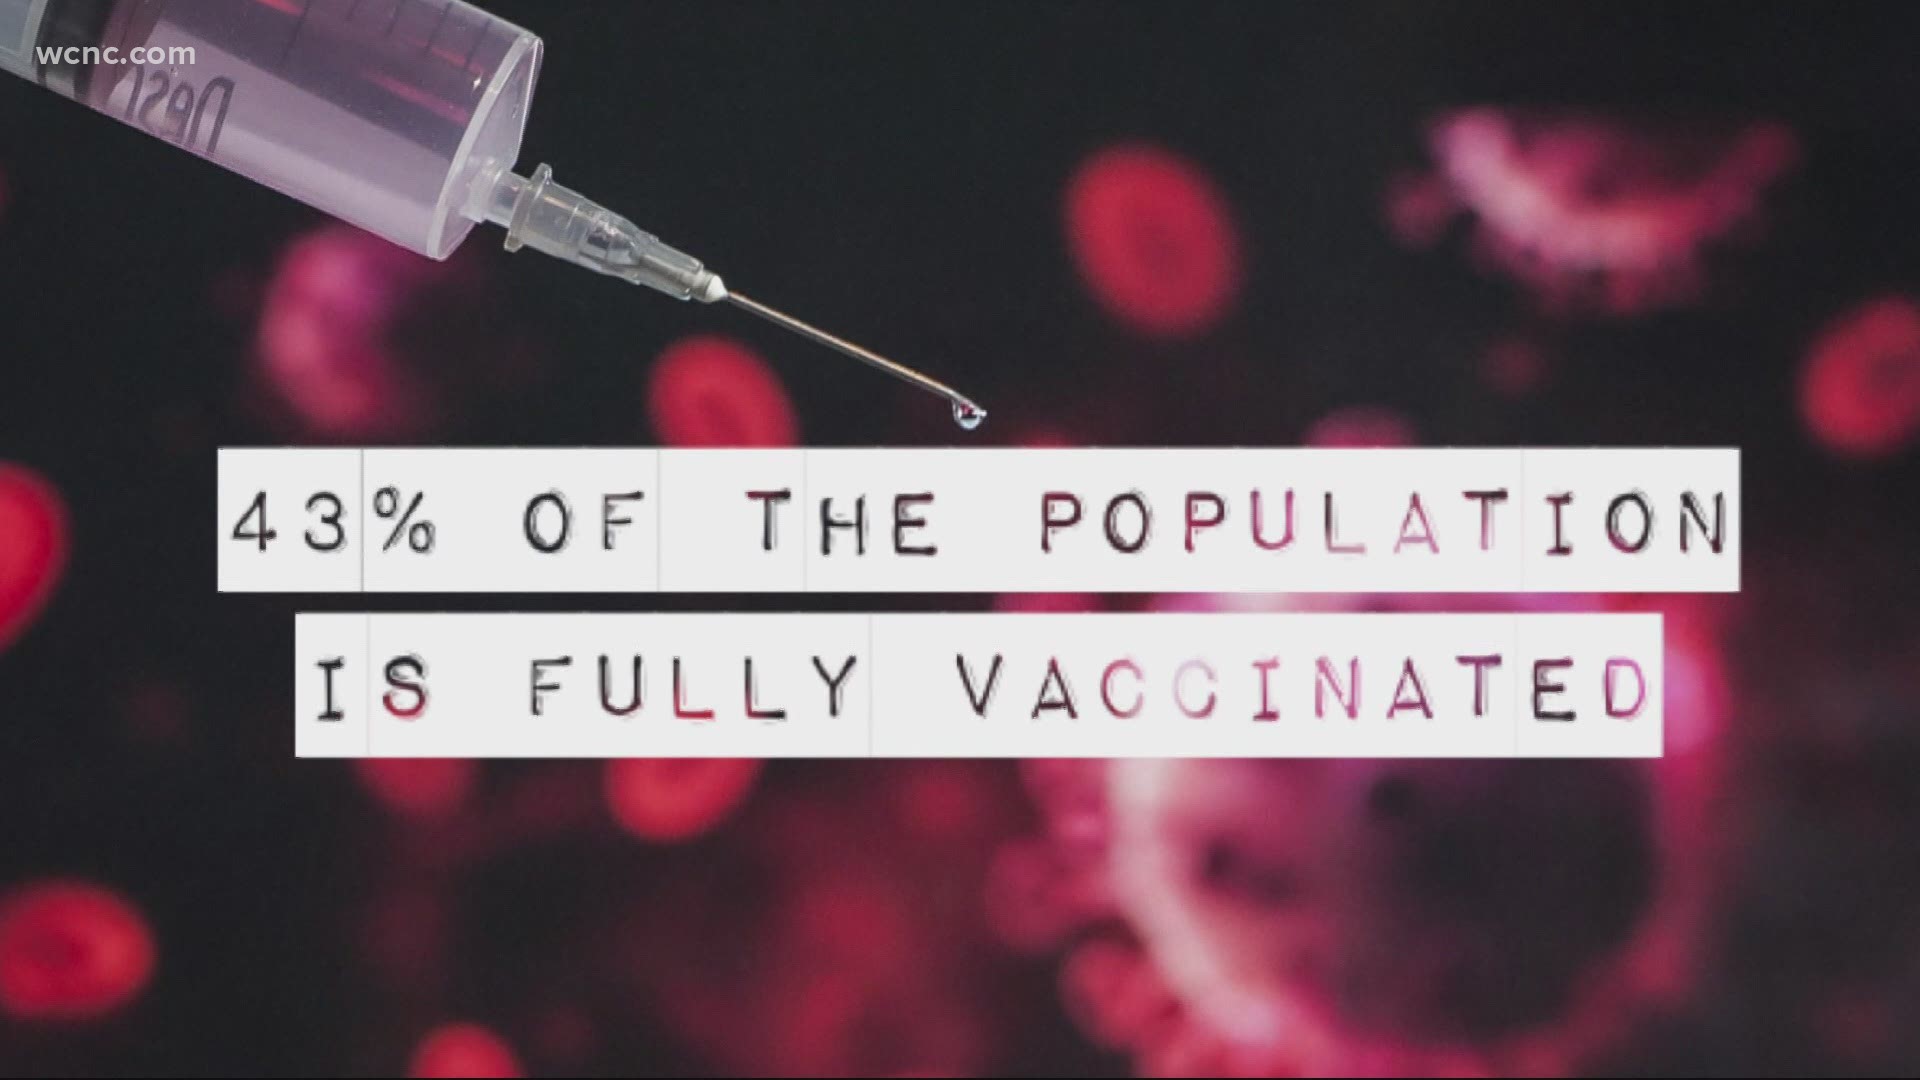 The Carolinas' vaccination rate remains lower than the national average at 43%